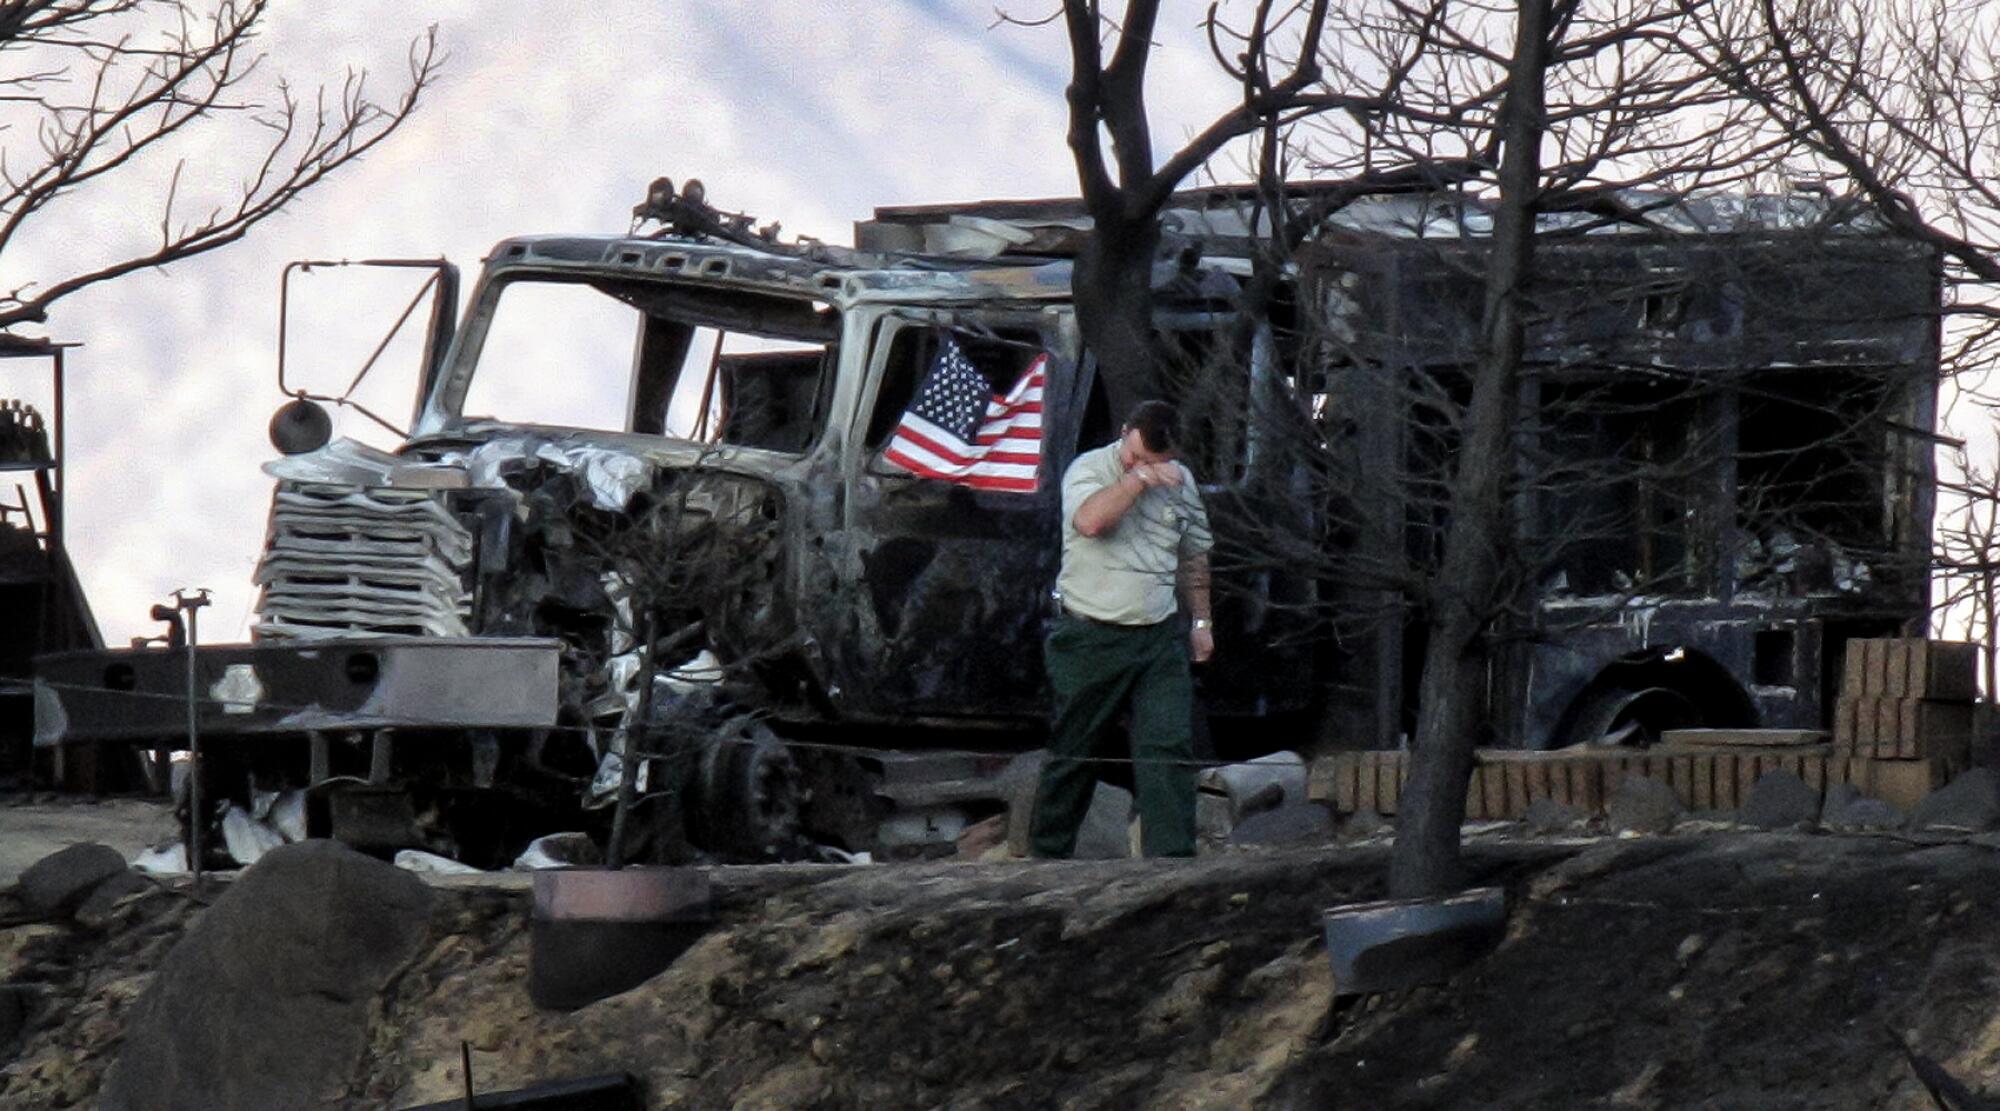 A man  stands by a burned truck and lifts a hand to his face